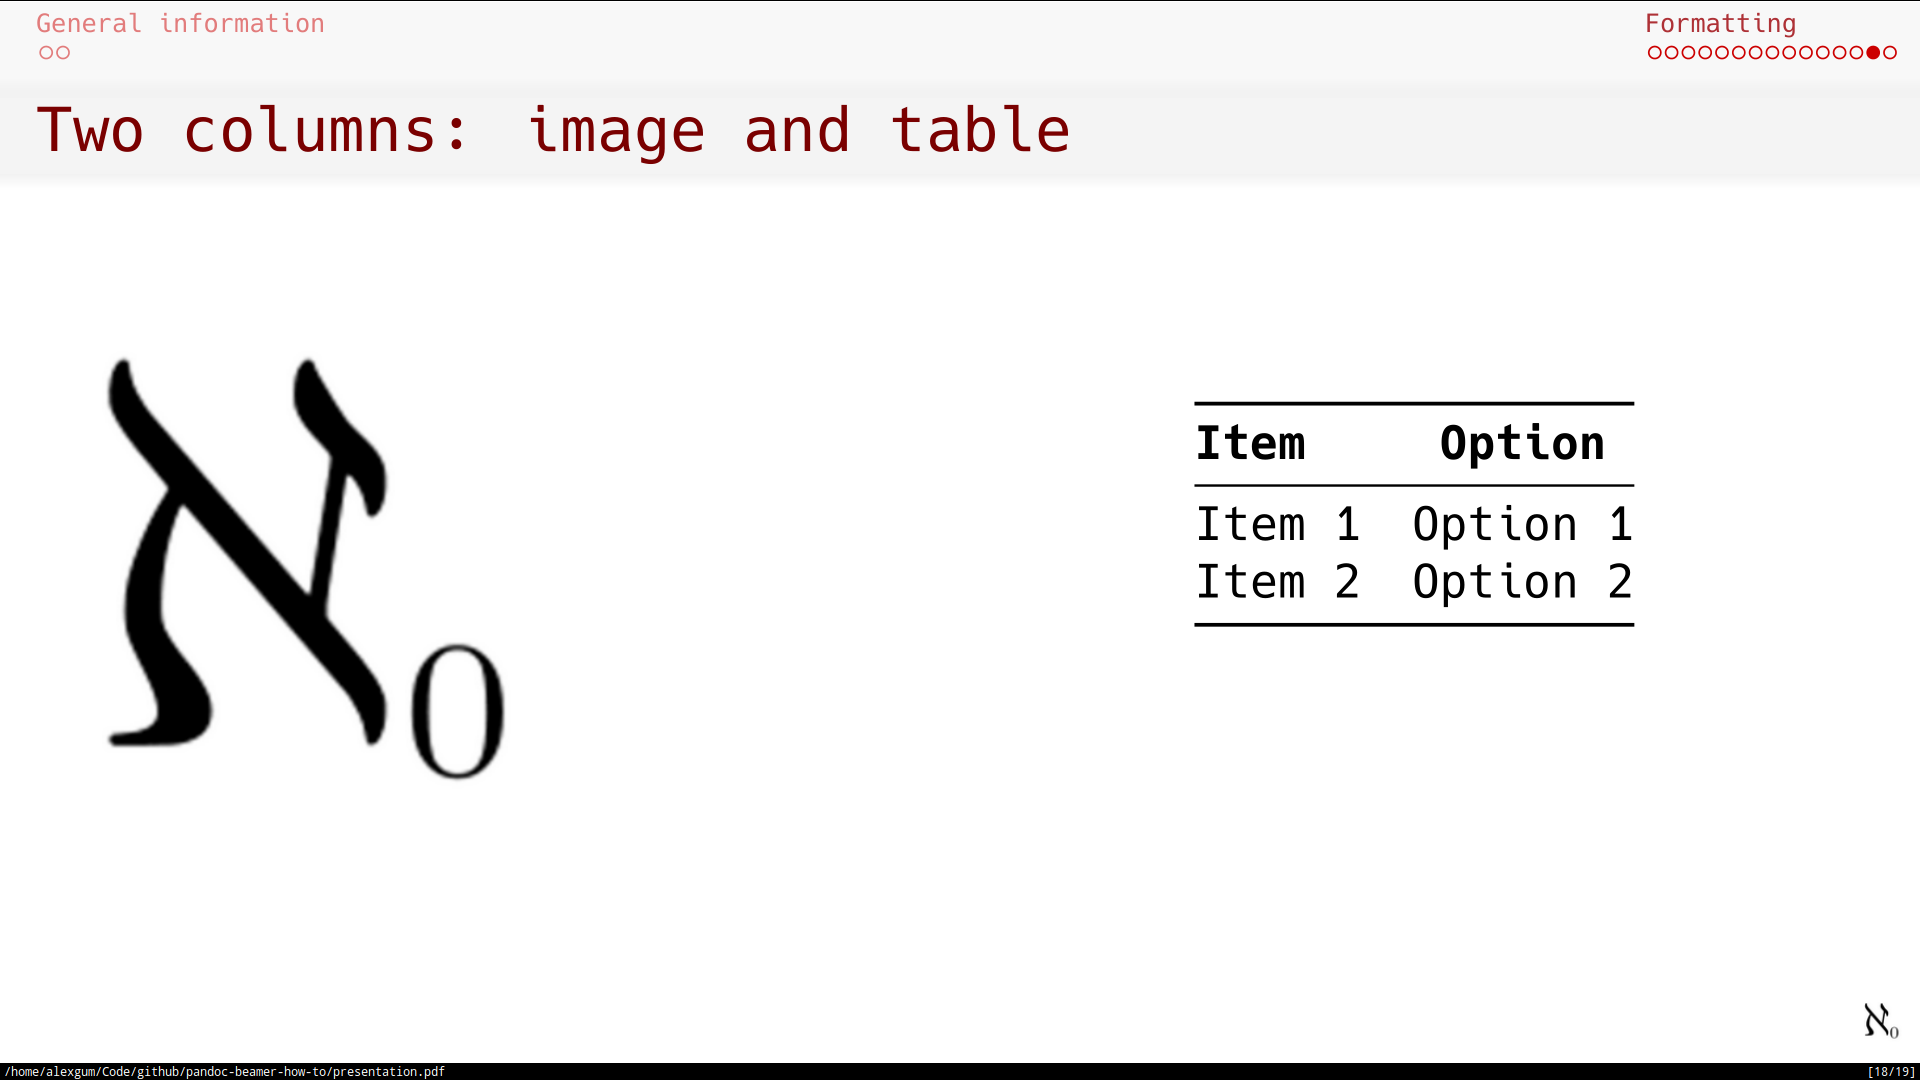 Two columns: image and table